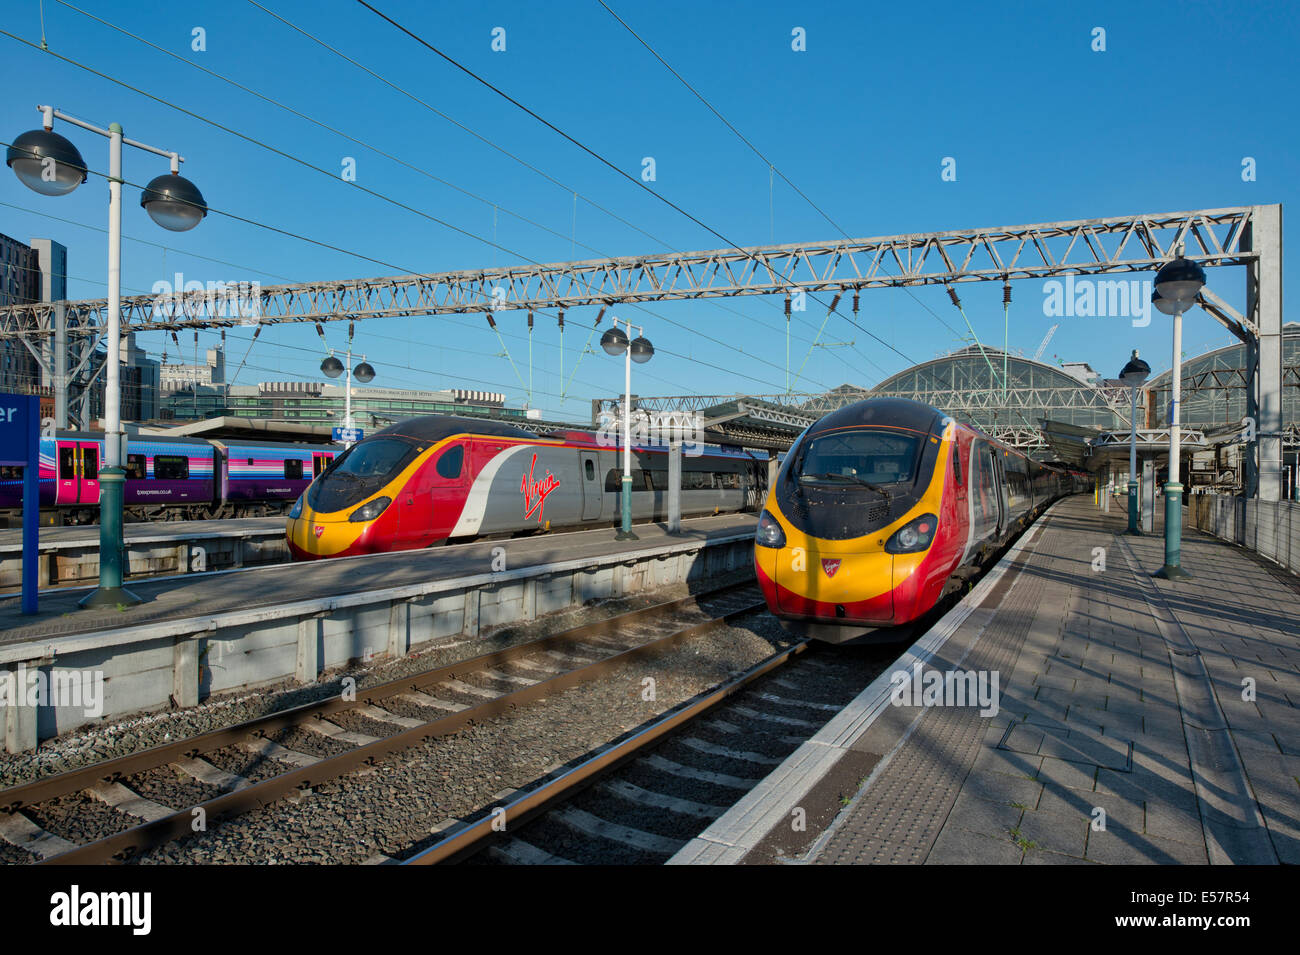 Two Virgin Class 390 Pendolino trains in the platforms of Manchester Piccadilly Rail Station. Stock Photo